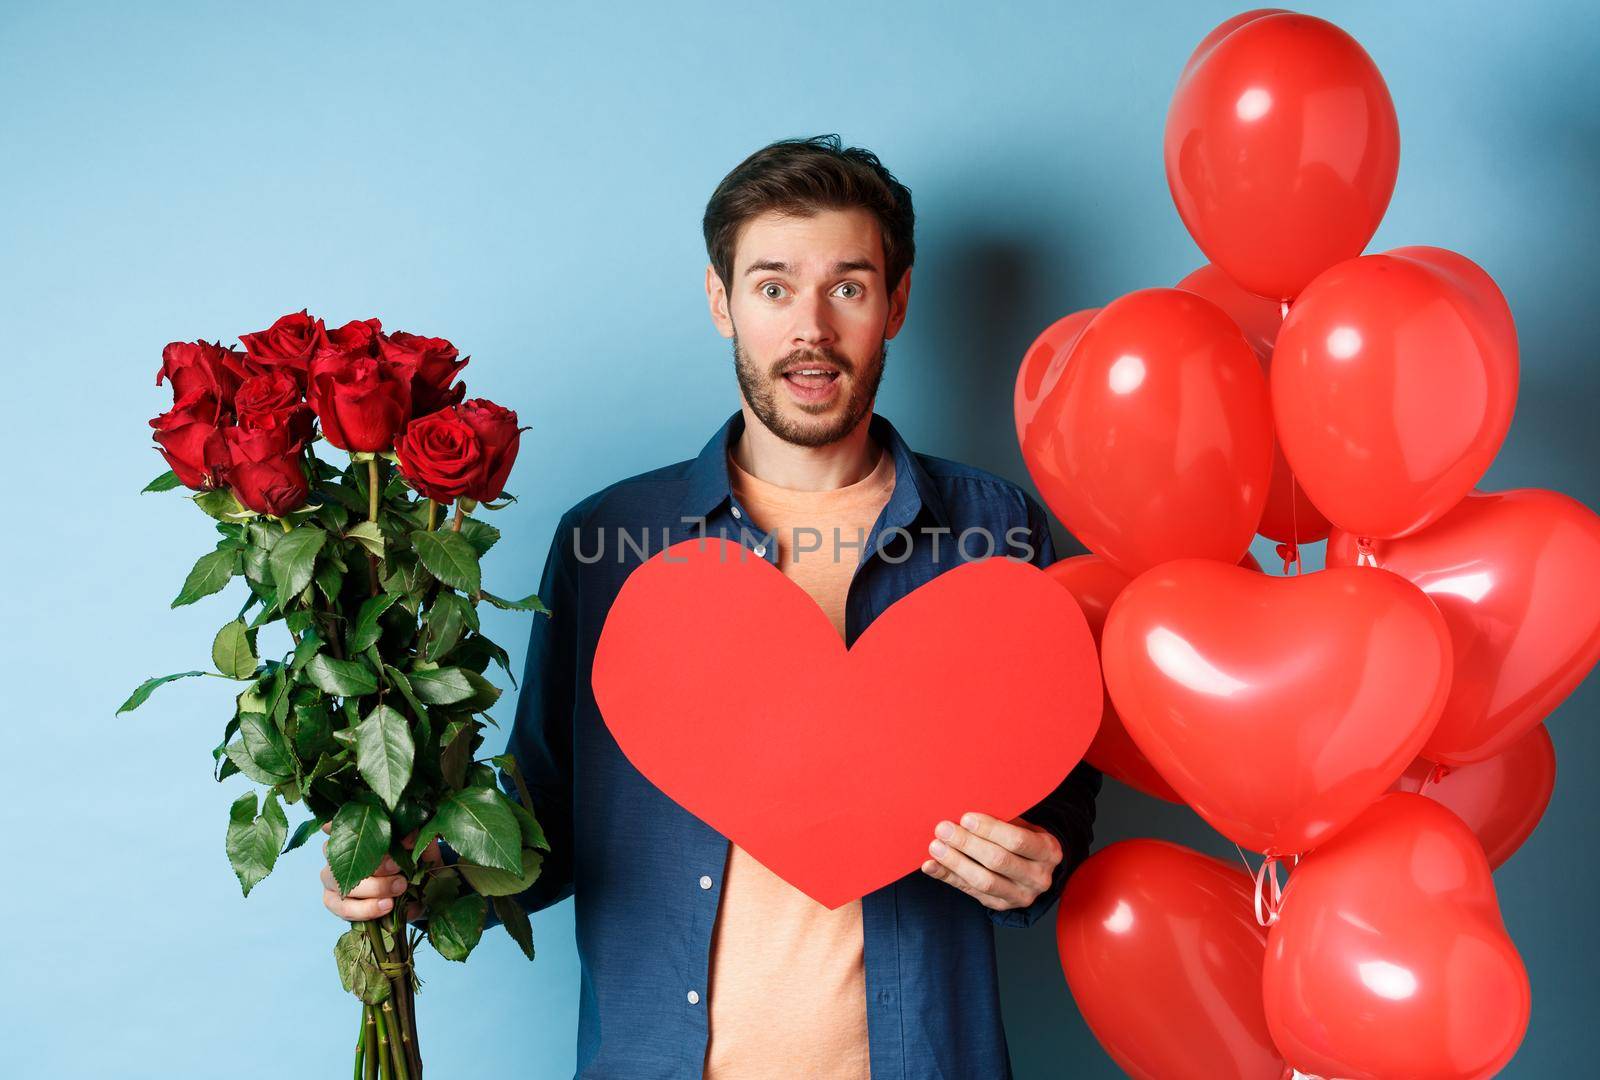 Man in love bring surprise gifts on romantic date, holding bouquet of red roses and valentine red heart, standing near balloons and looking at lover, blue background.